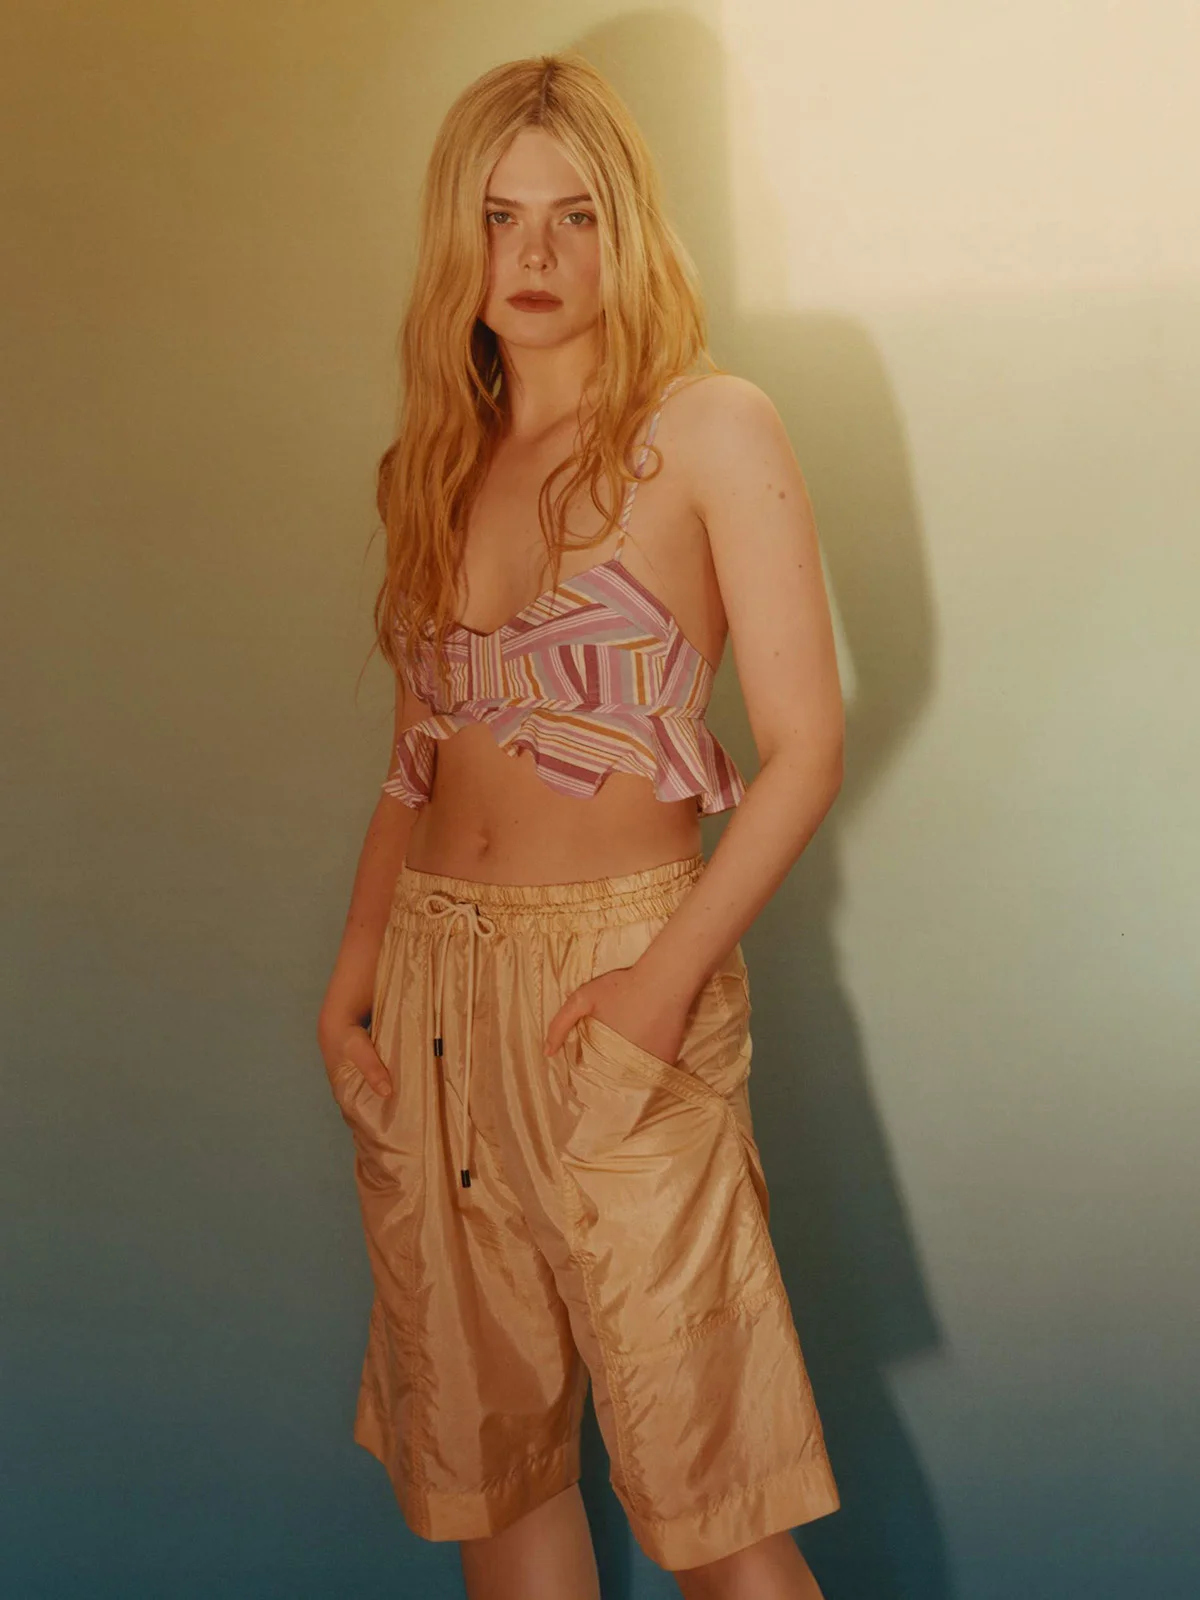 Elle Fanning covers Porter Magazine April 4th, 2022 by Milan Zrnic